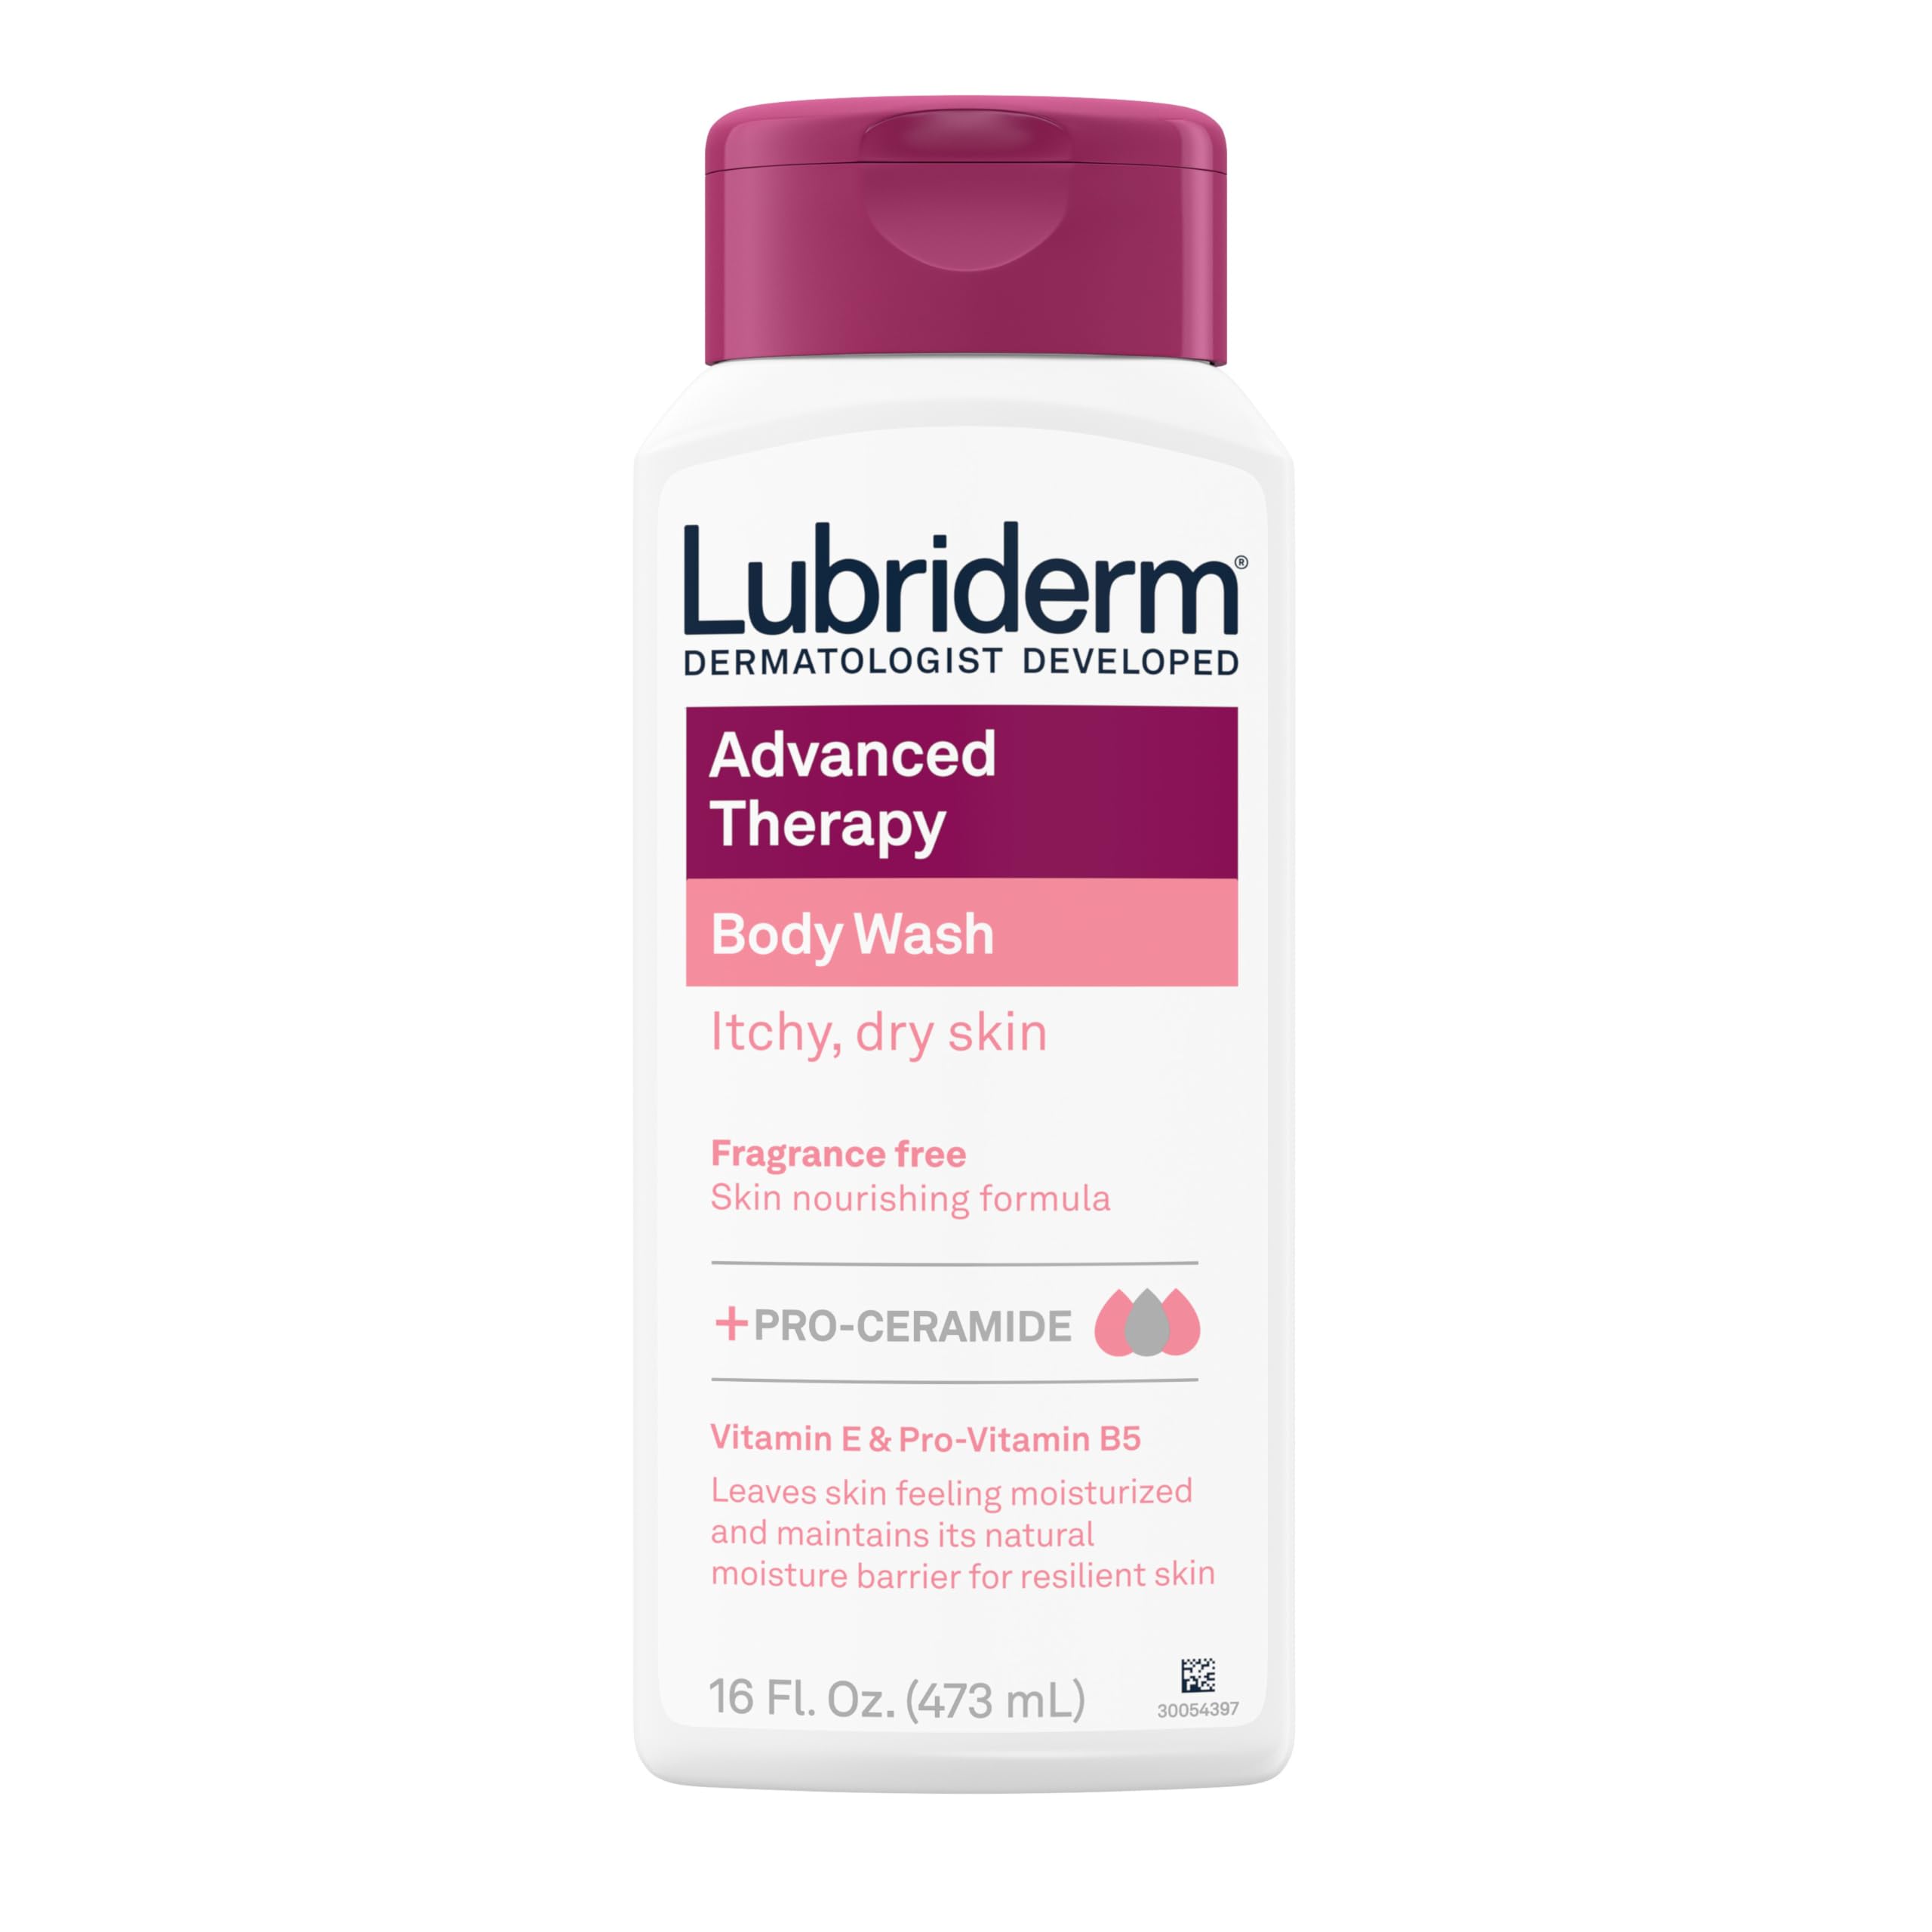 Lubriderm Advanced Therapy Body Wash, Unscented Nourishing Cleanser with Pro-Ceramide, Vitamin E & Pro-Vitamin B5 Gently Cleanses Itchy, Dry Skin, Fragrance Free, Hypoallergenic, 16 fl. oz